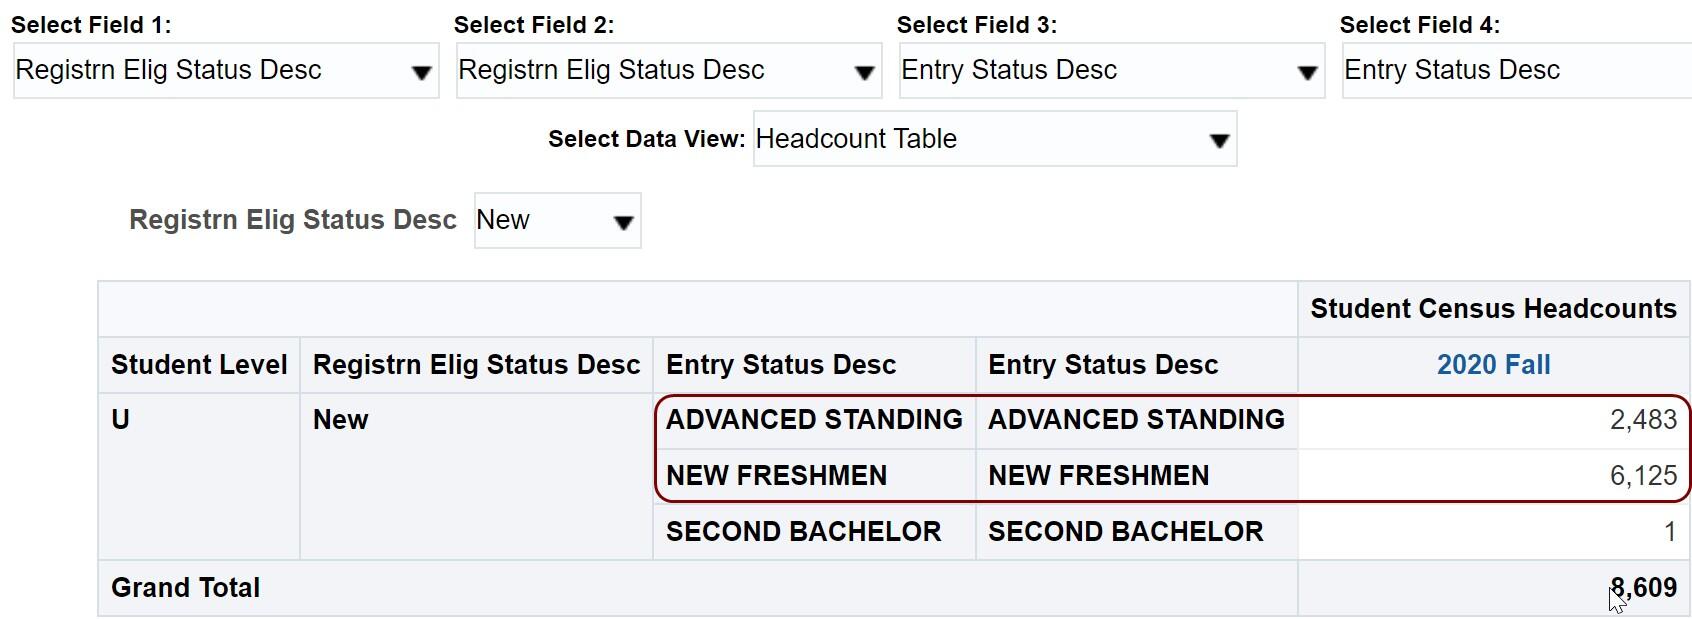 Census by Multiple Fields with Fall 2020 selected for Year & Semester and Regstrn Elig Status Desc selected for all 4 Select Fields